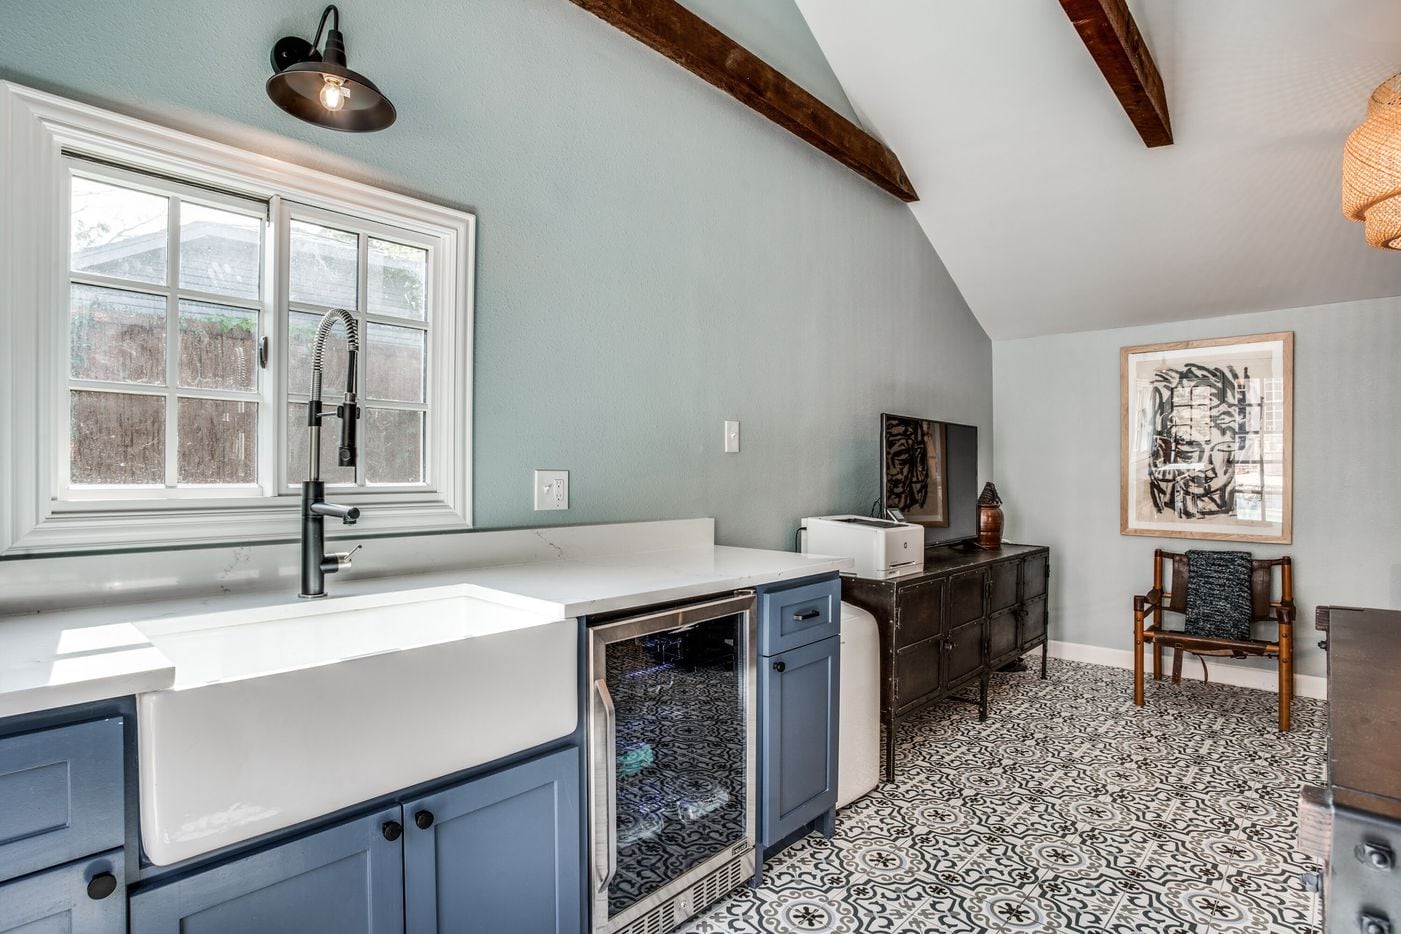 Take a look at this renovated home in Dallas’ Lakewood neighborhood built in the 1920s